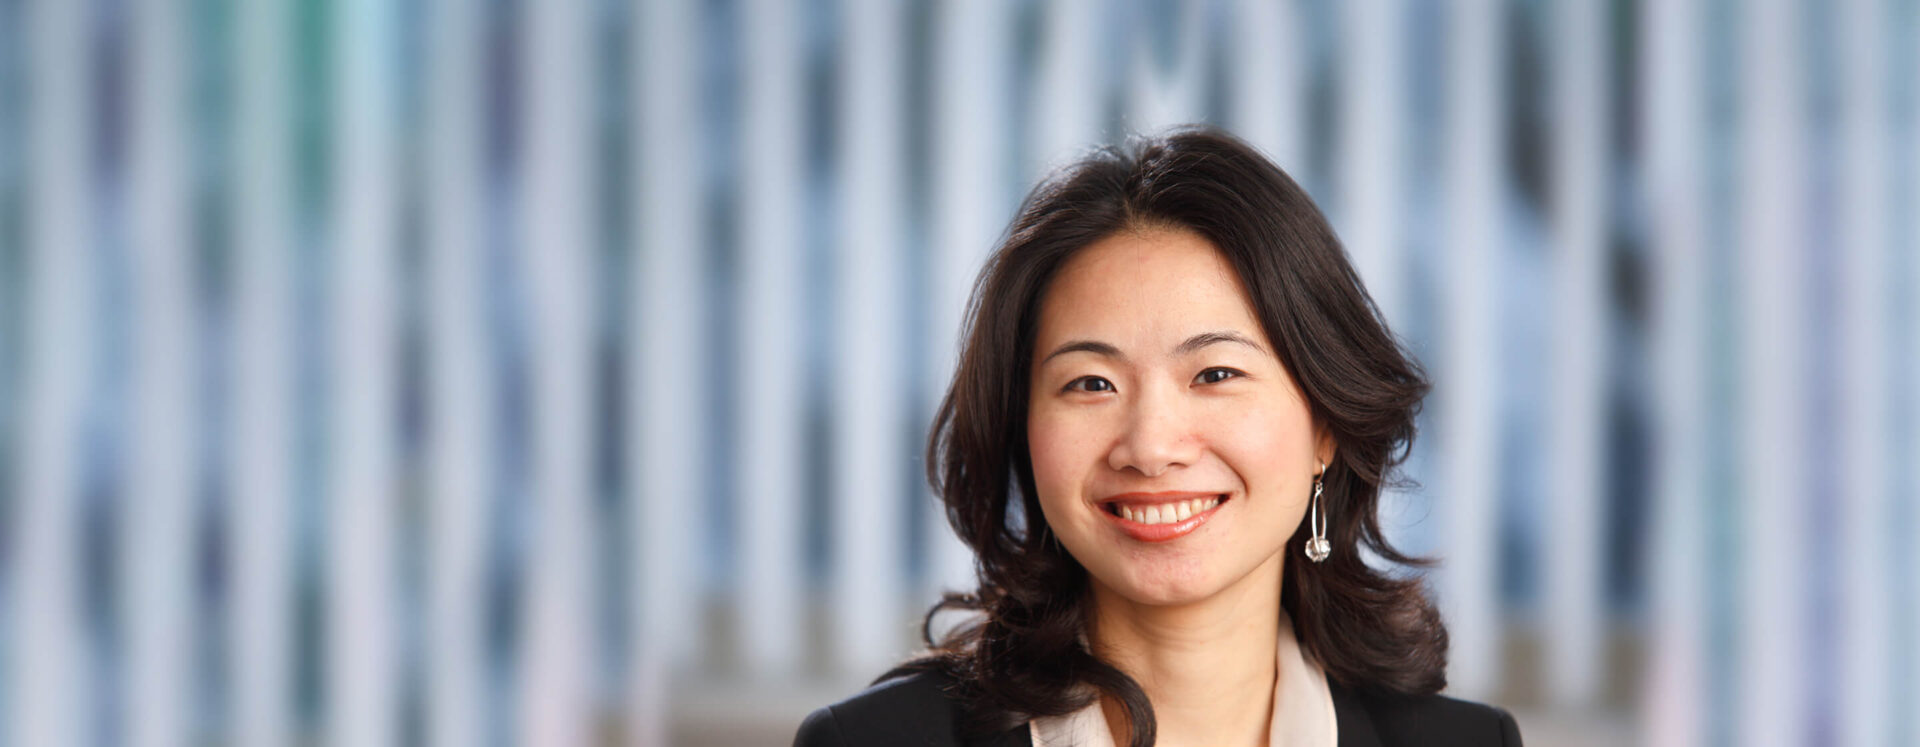 An award-winning organizational scholar and expert in psychological safety and error management, Lei’s work focuses on how teams can adapt in complex, time-pressured, and consequence-laden environments. - IMD Business School